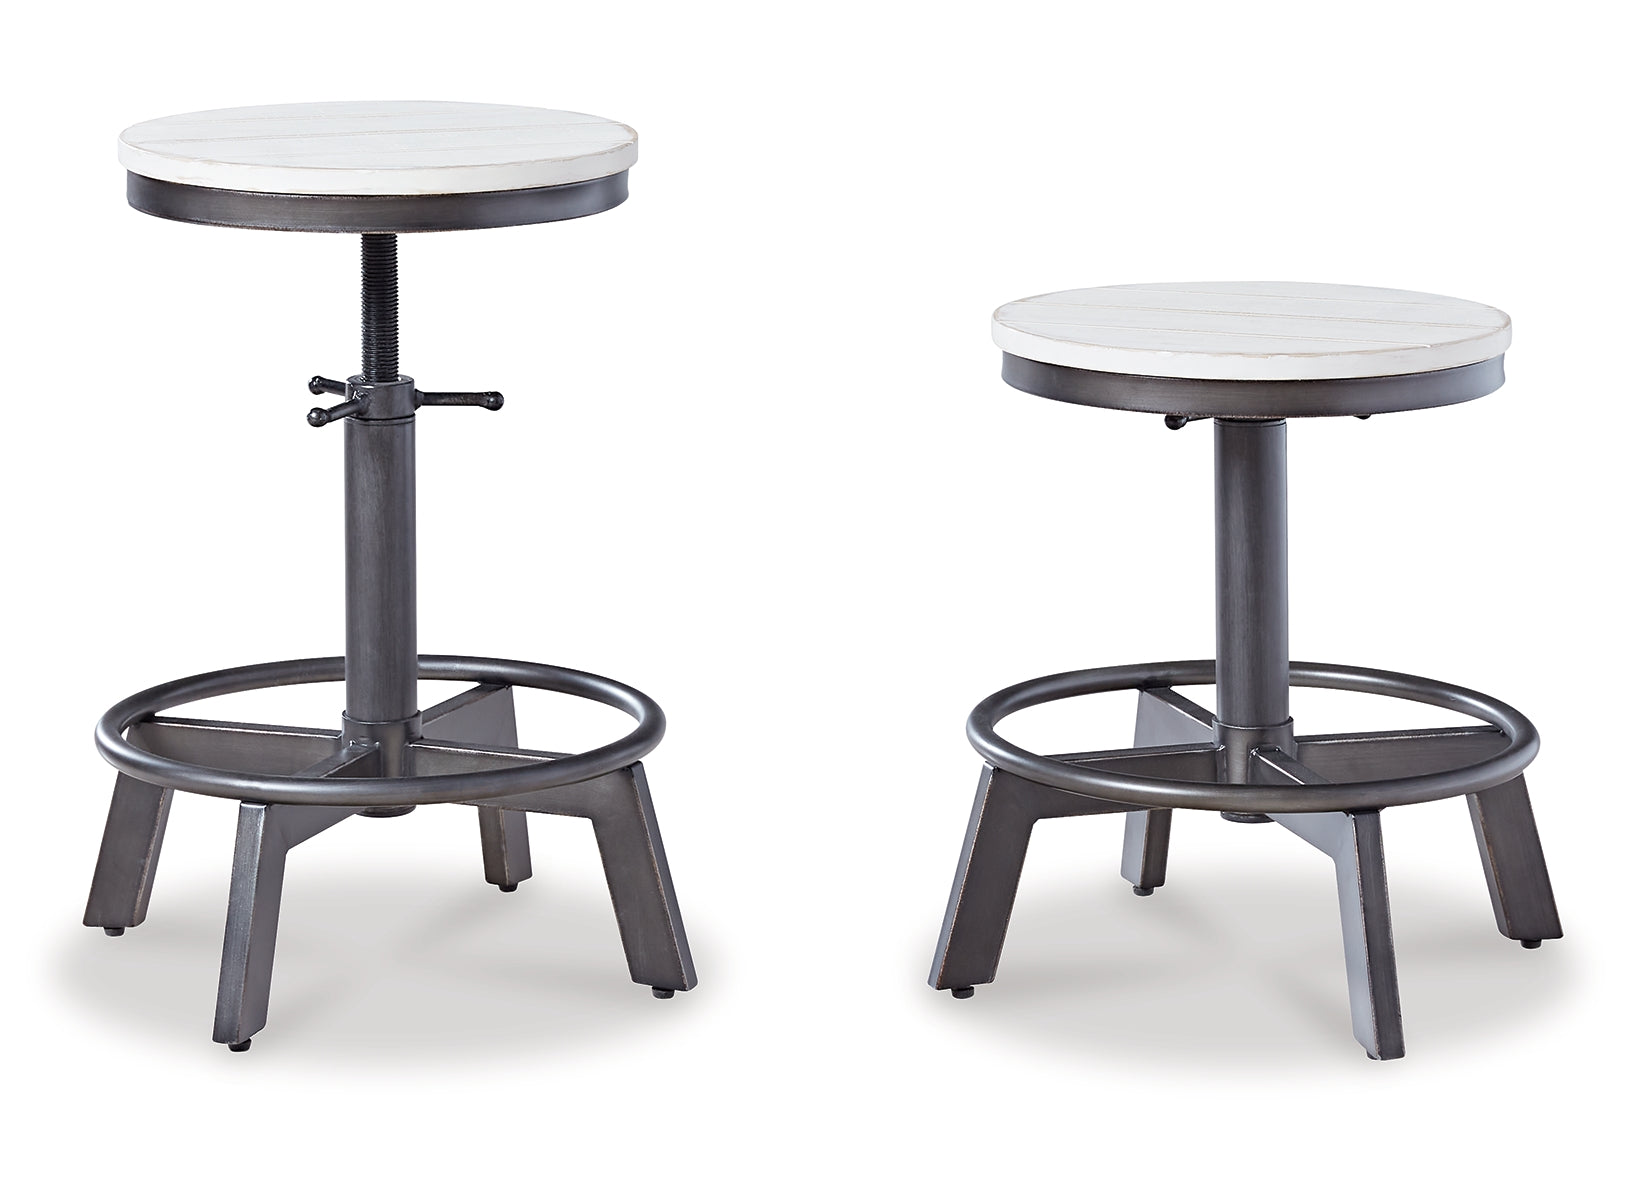 Torjin Counter Height Dining Table and 4 Barstools